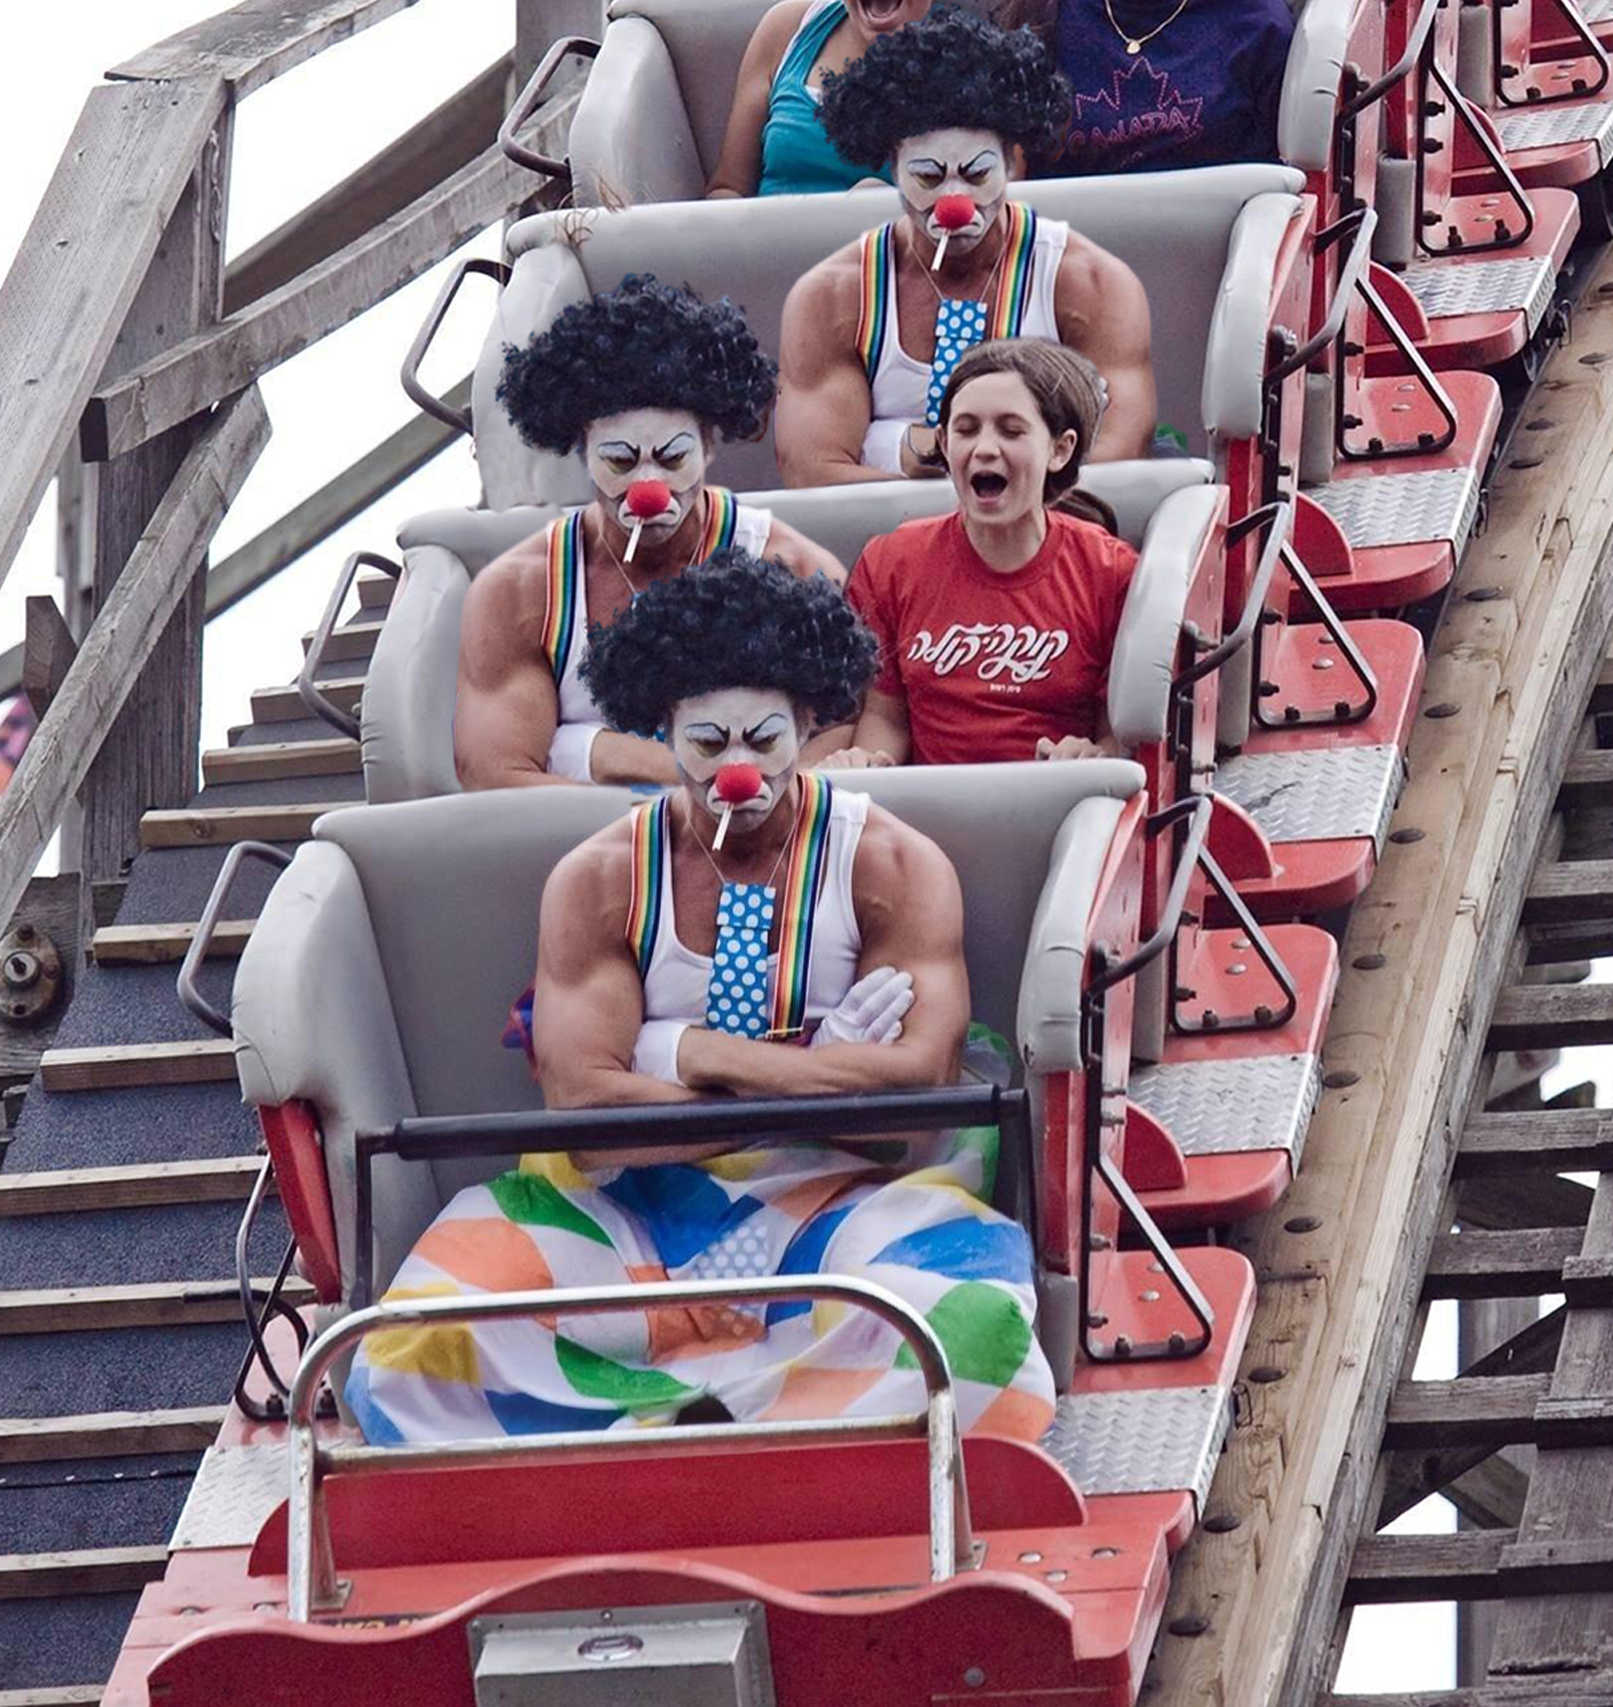 Clown ride roller coaster attraction v2.png